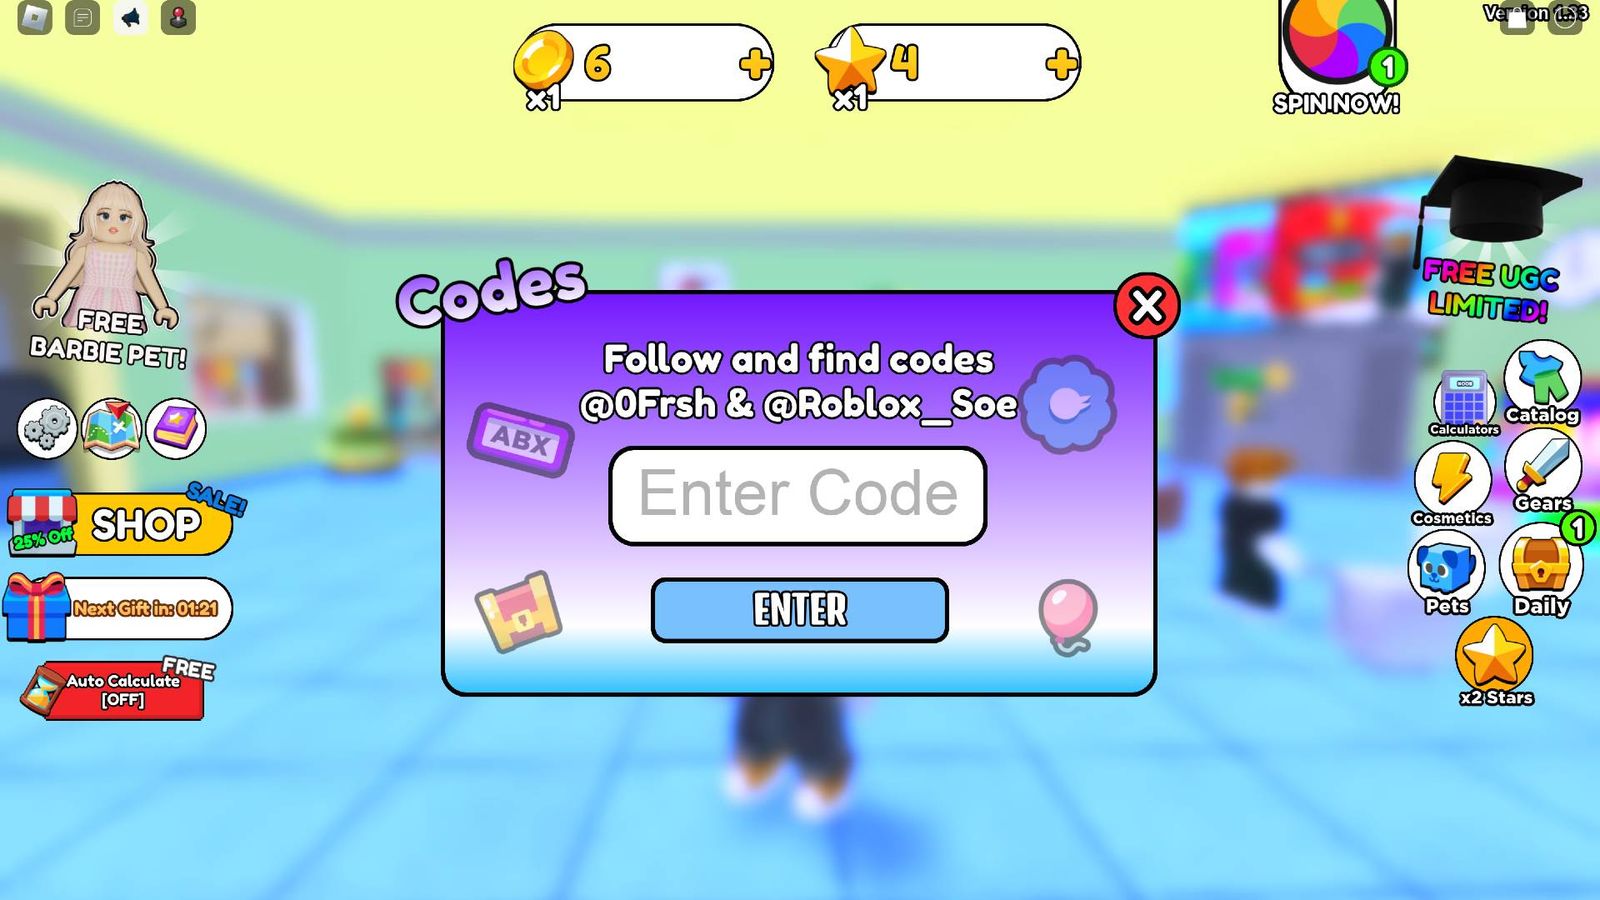 The code redemption box in Math Wall Simulator on Roblox.